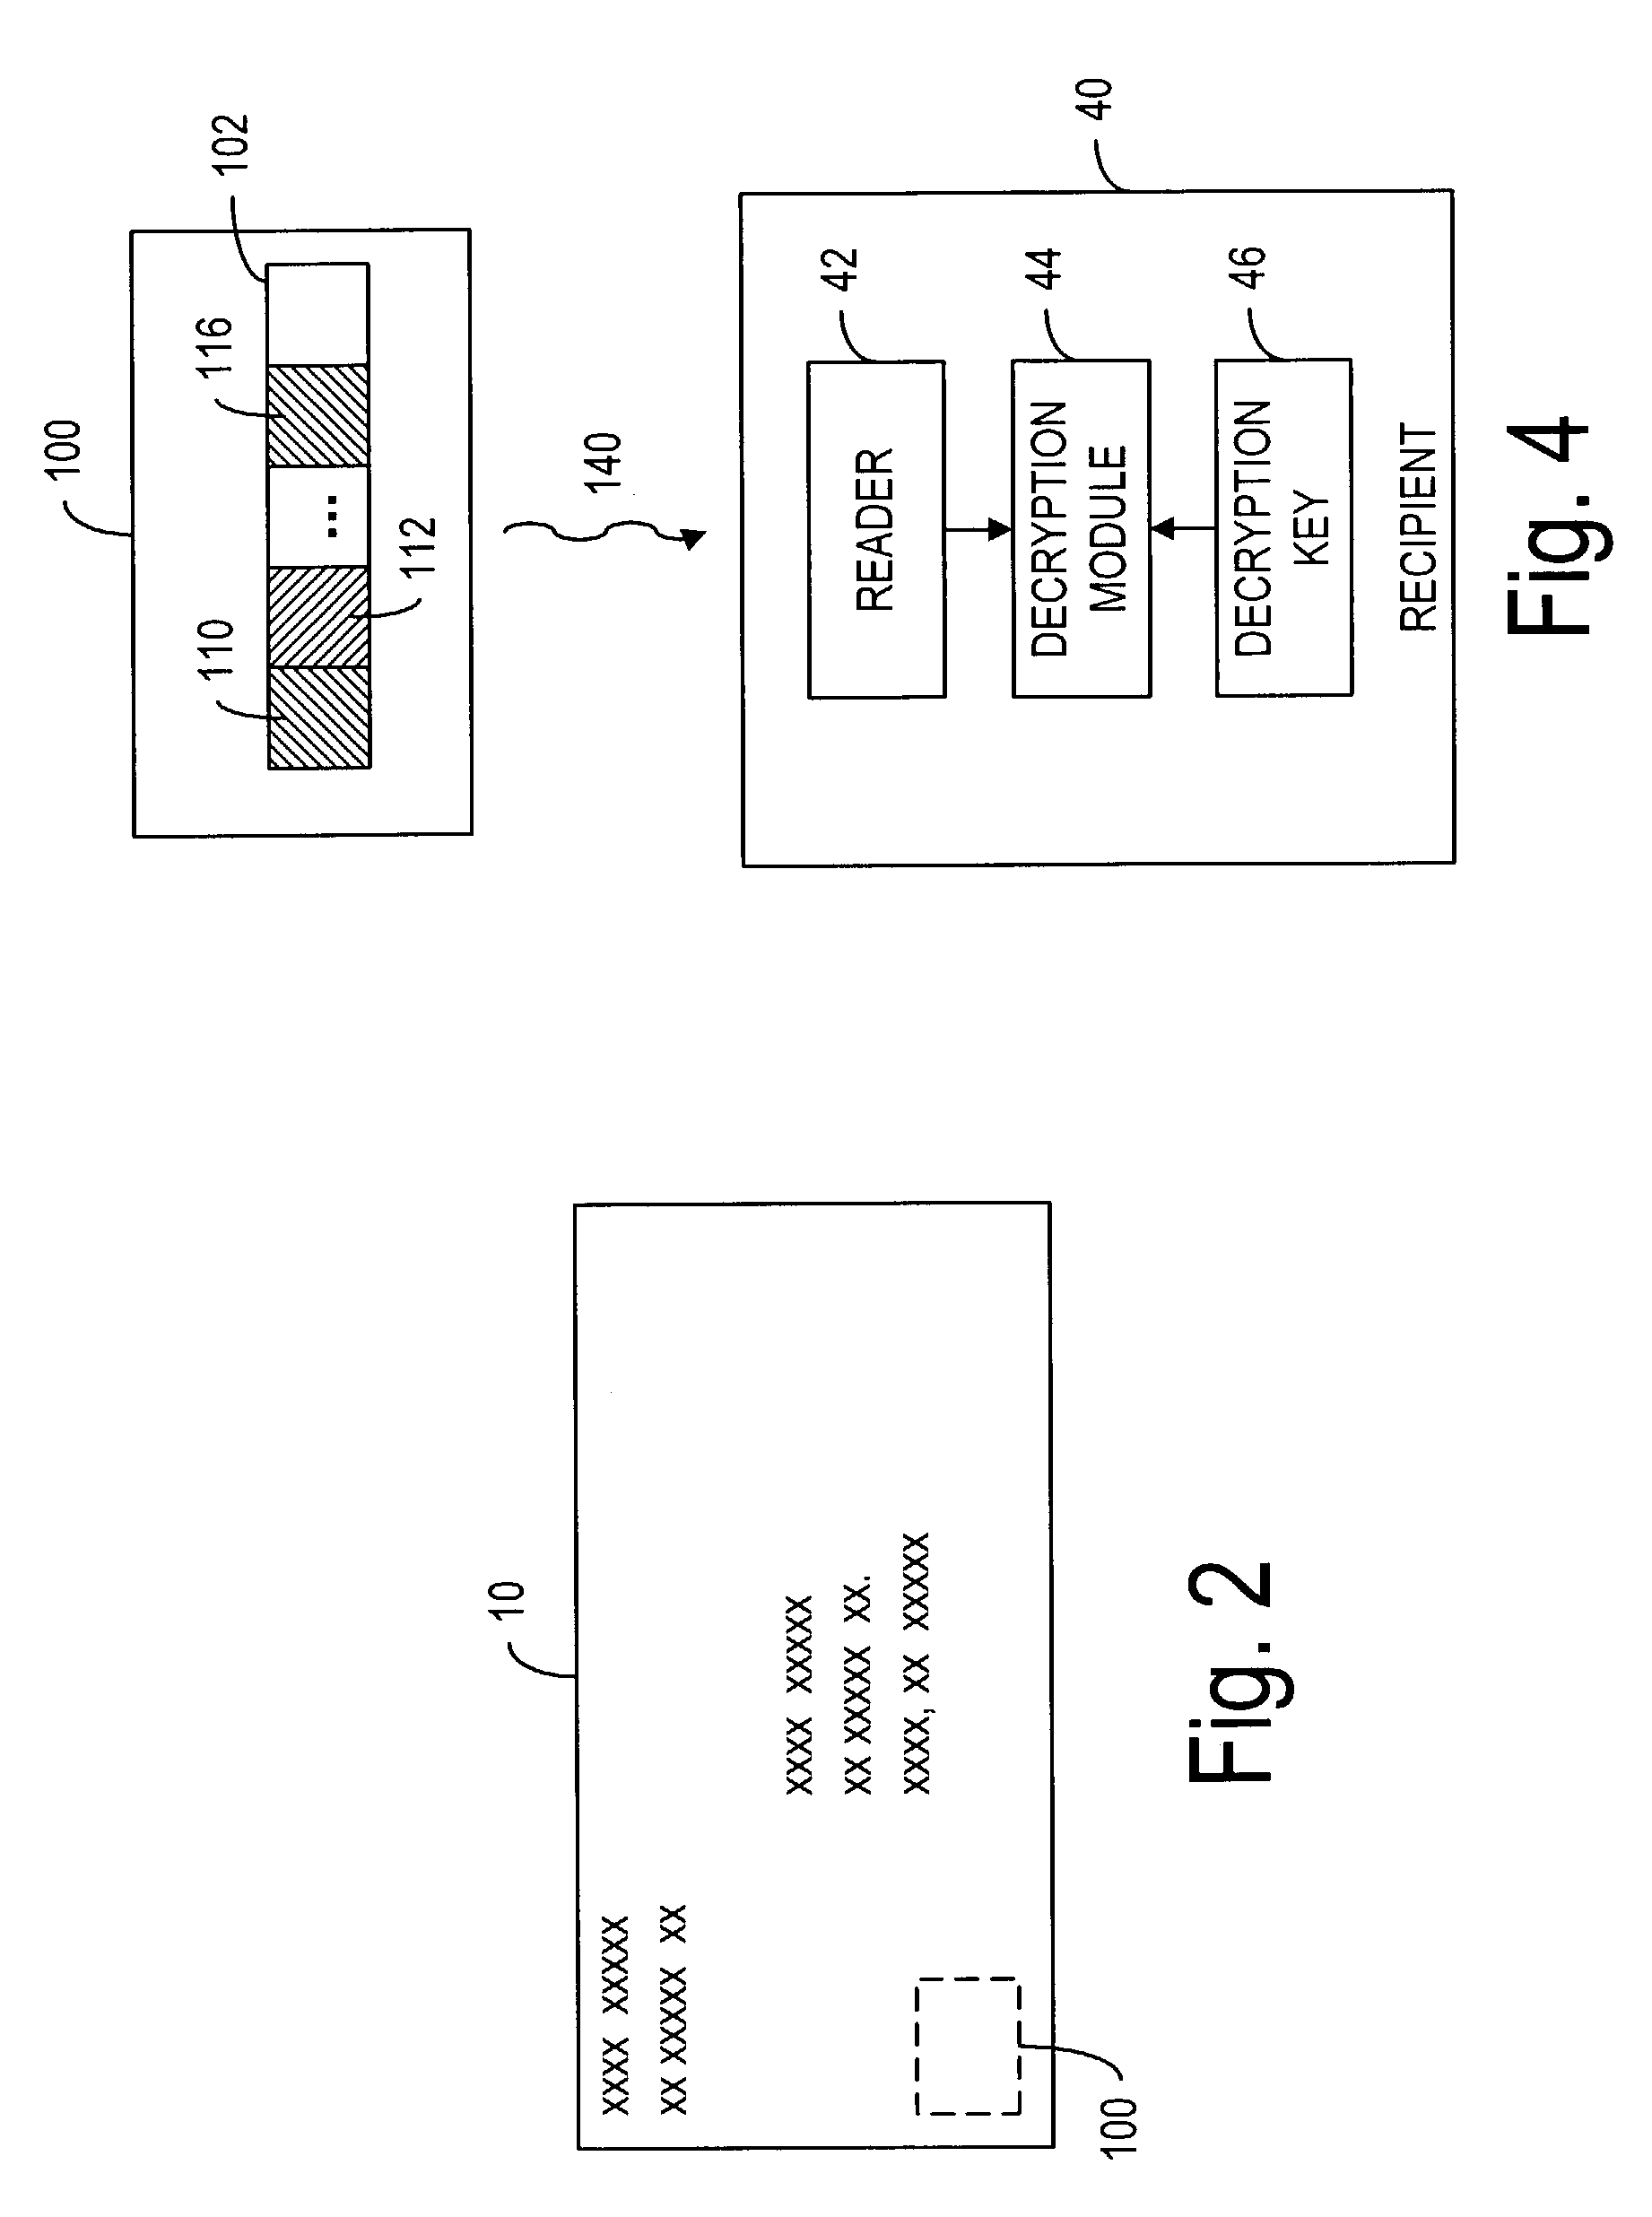 Reusable electronic tag for secure data accumulation